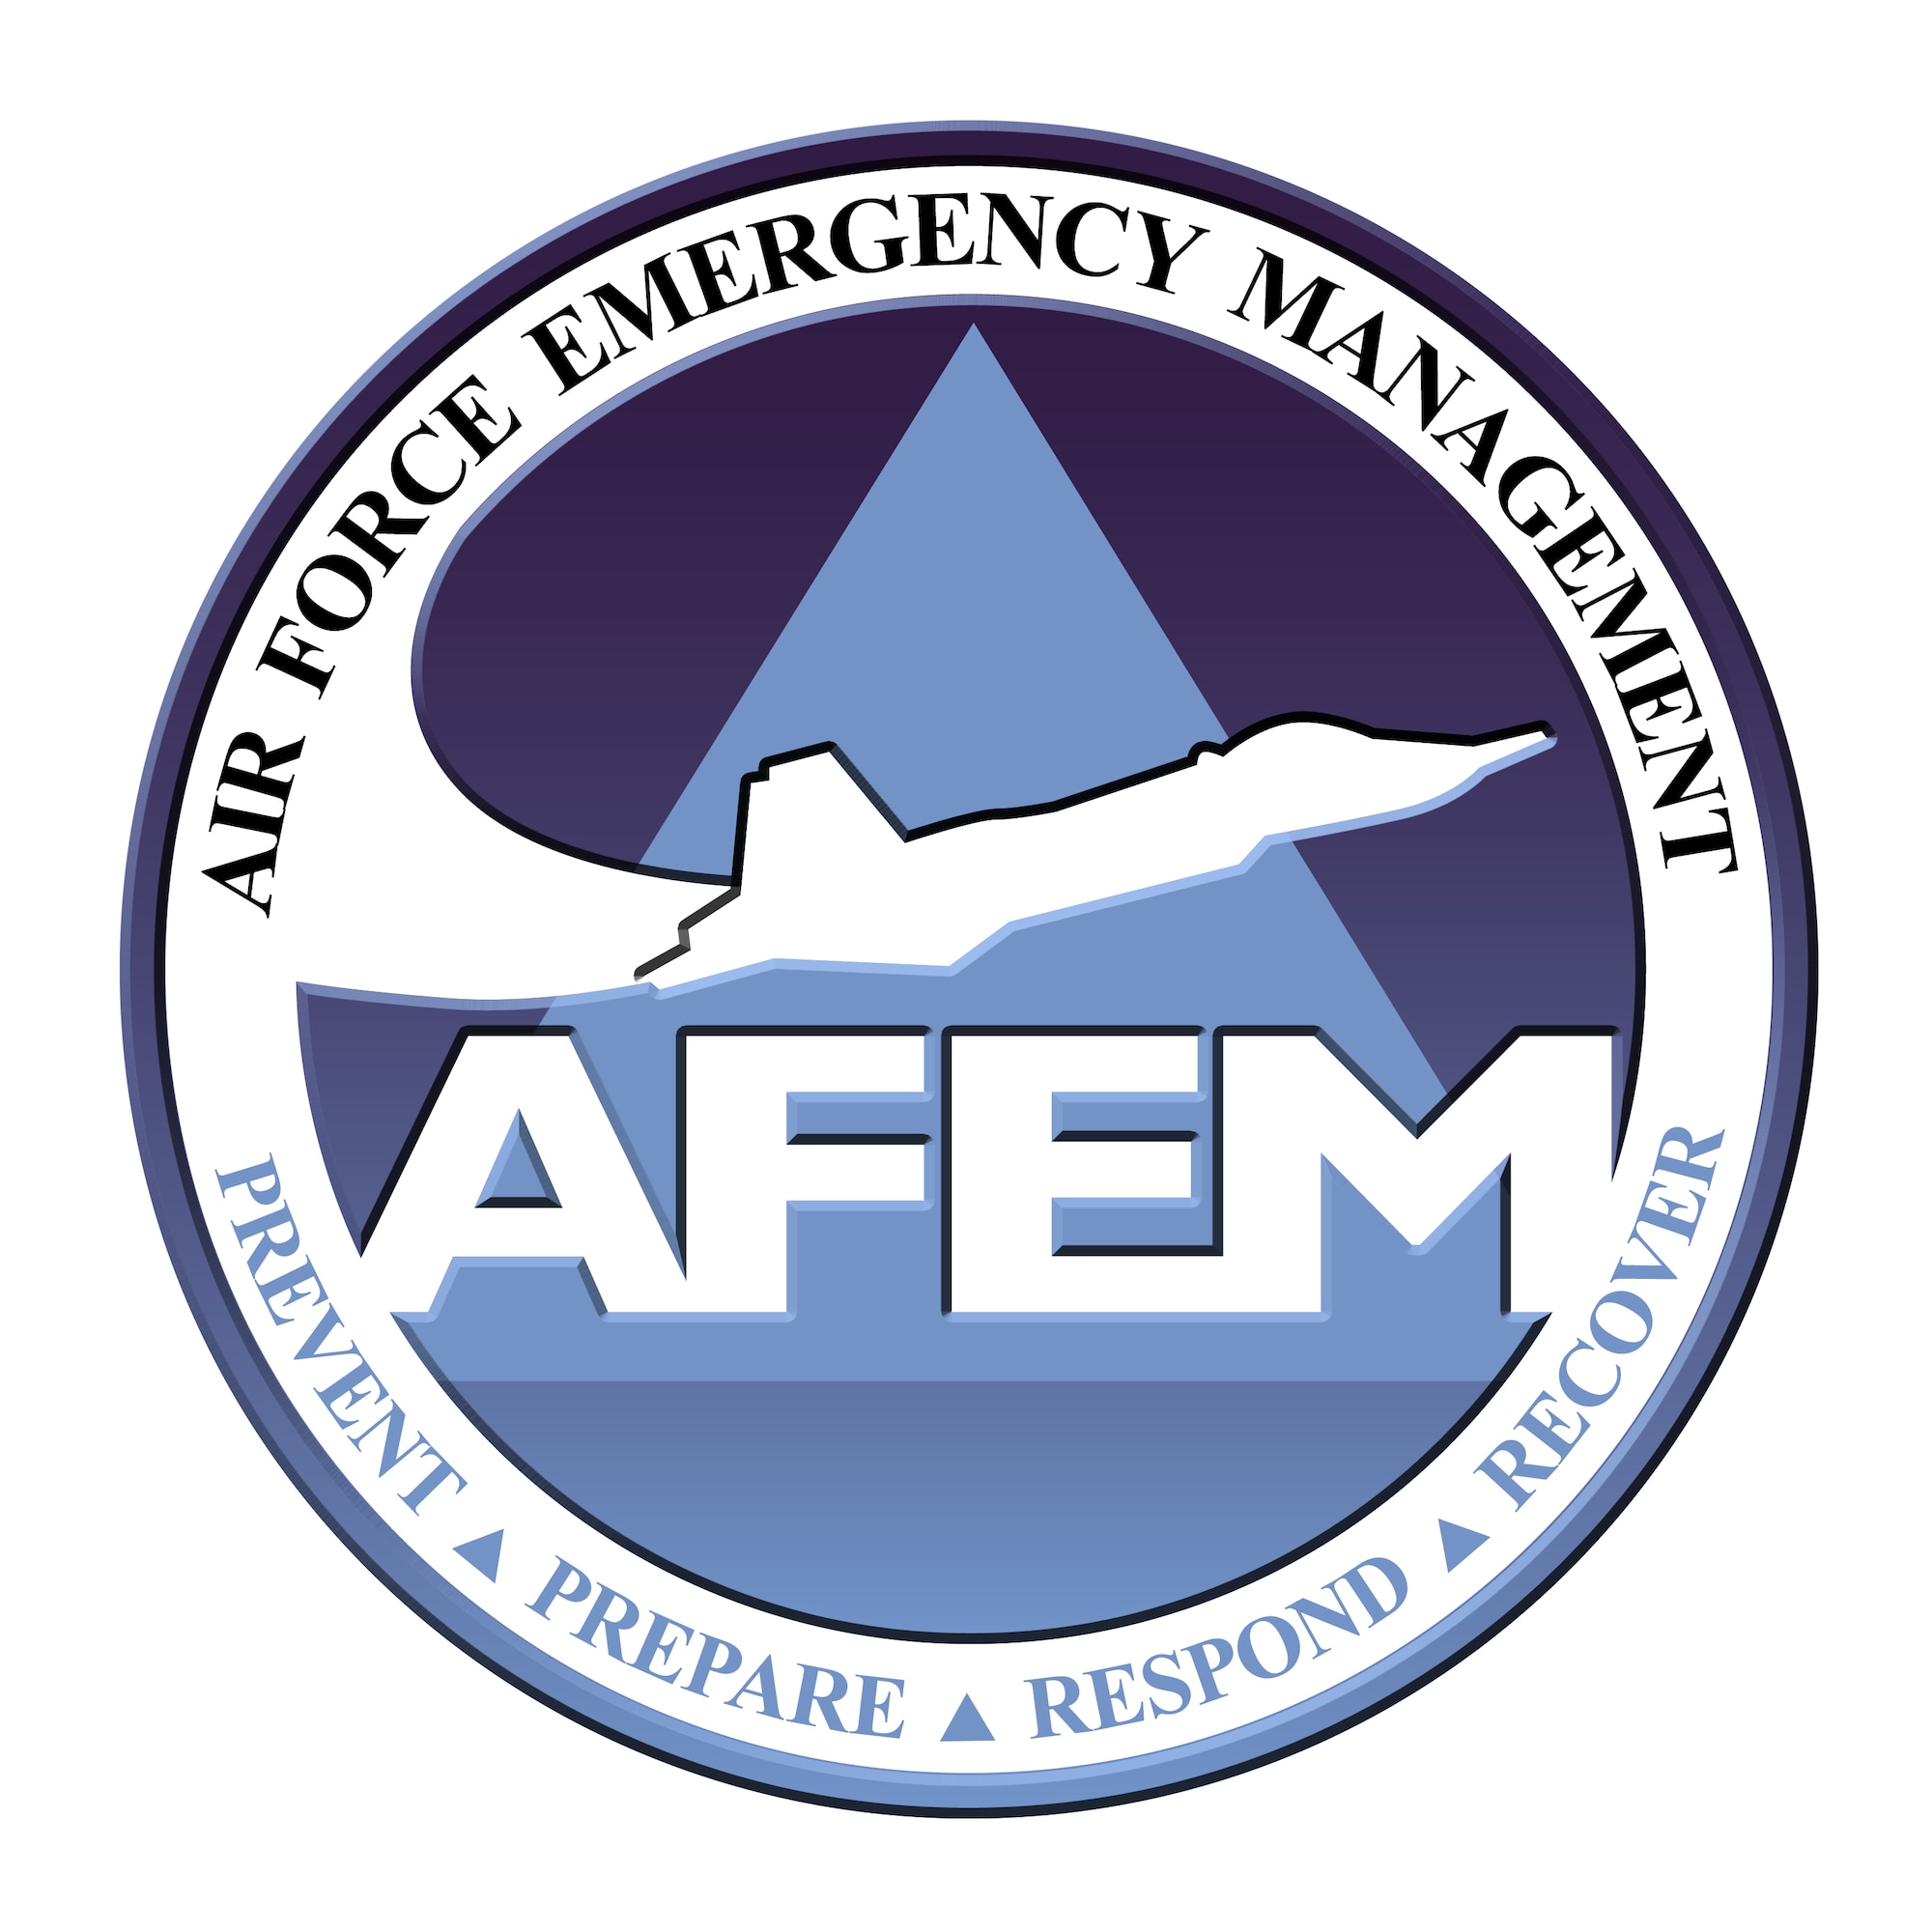 (Courtesy of Air Force Emergency Management)